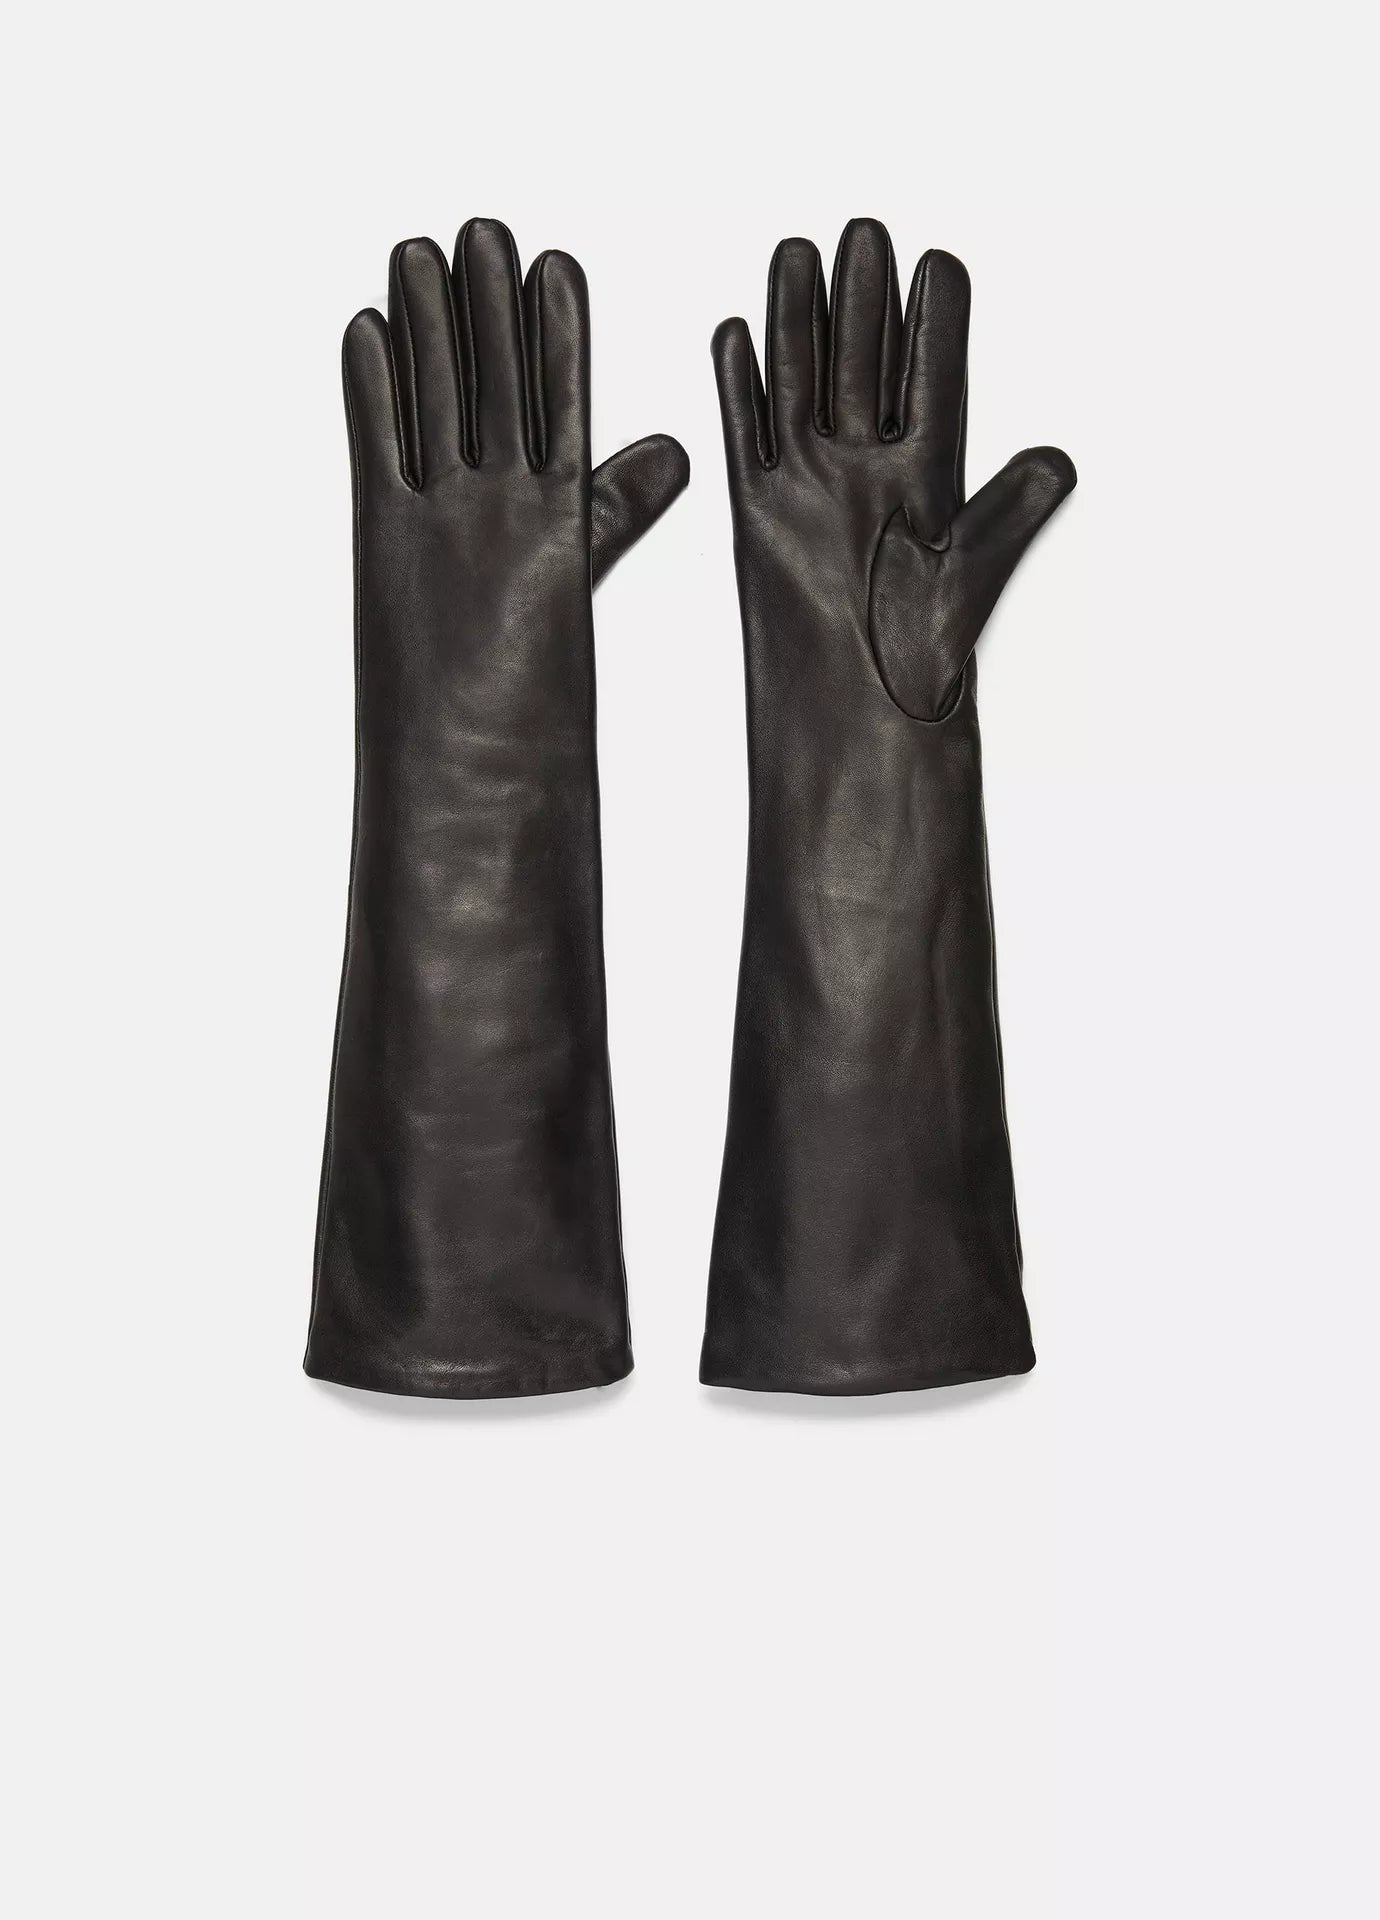 Vince Long Stacked Leather Glove, leather gloves, women's gloves, long leather gloves, women's accessories, winter